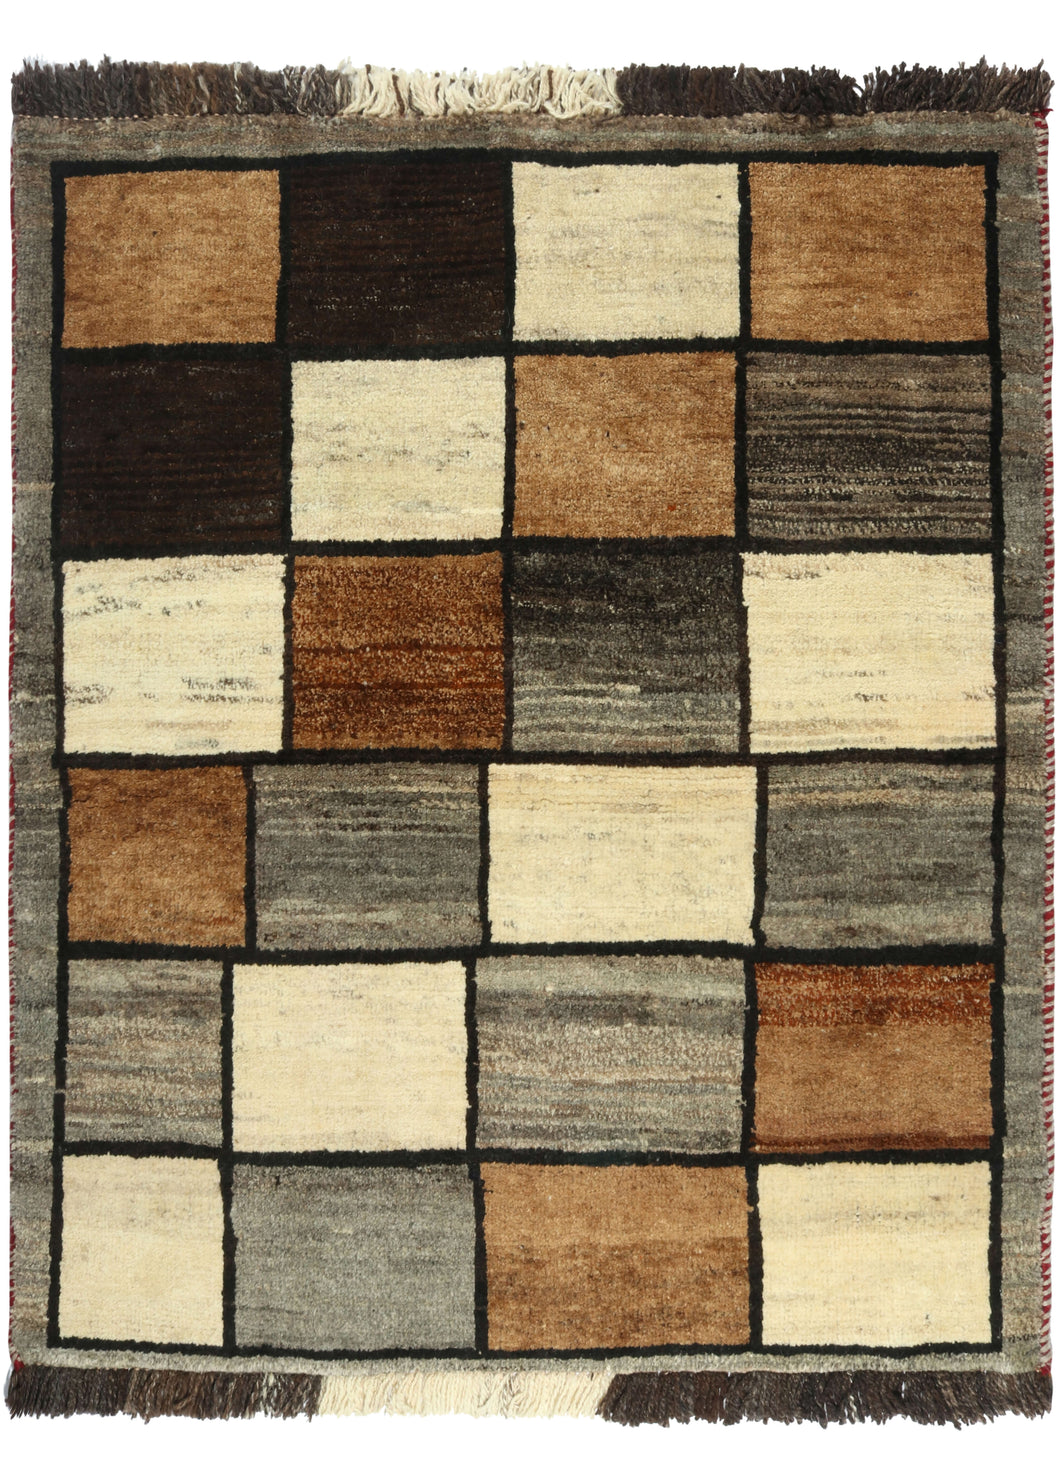 This Vintage Checker Gabbeh Rug  features a field of checkered squares composed of a variety of variegated tones of undyed wool in shades of gray, beige, and dark and light brown. The squares are neatly yet imperfectly ordered slightly shifting in scale. Each square is clearly delineated in a dark brown outline and the whole composition is framed by a gray band. Both light and dark handspun wool warps were used which add visual interest to the fringes. The pile is densely woven, making this a plush rug.